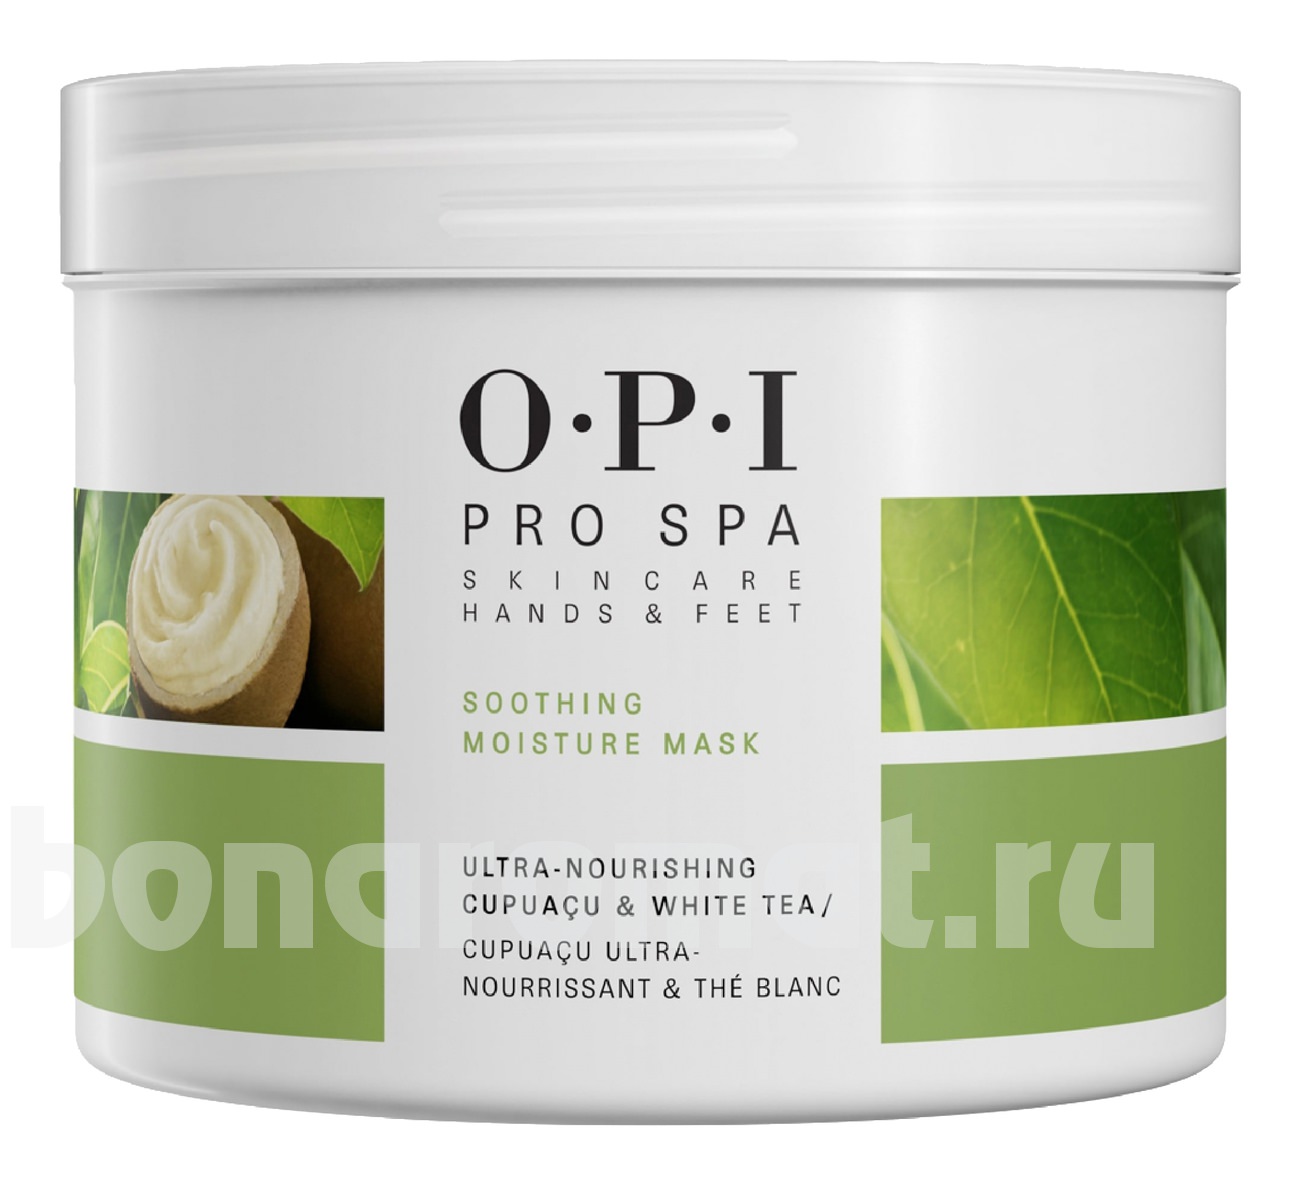      Pro Spa Soothing Moisture Mask